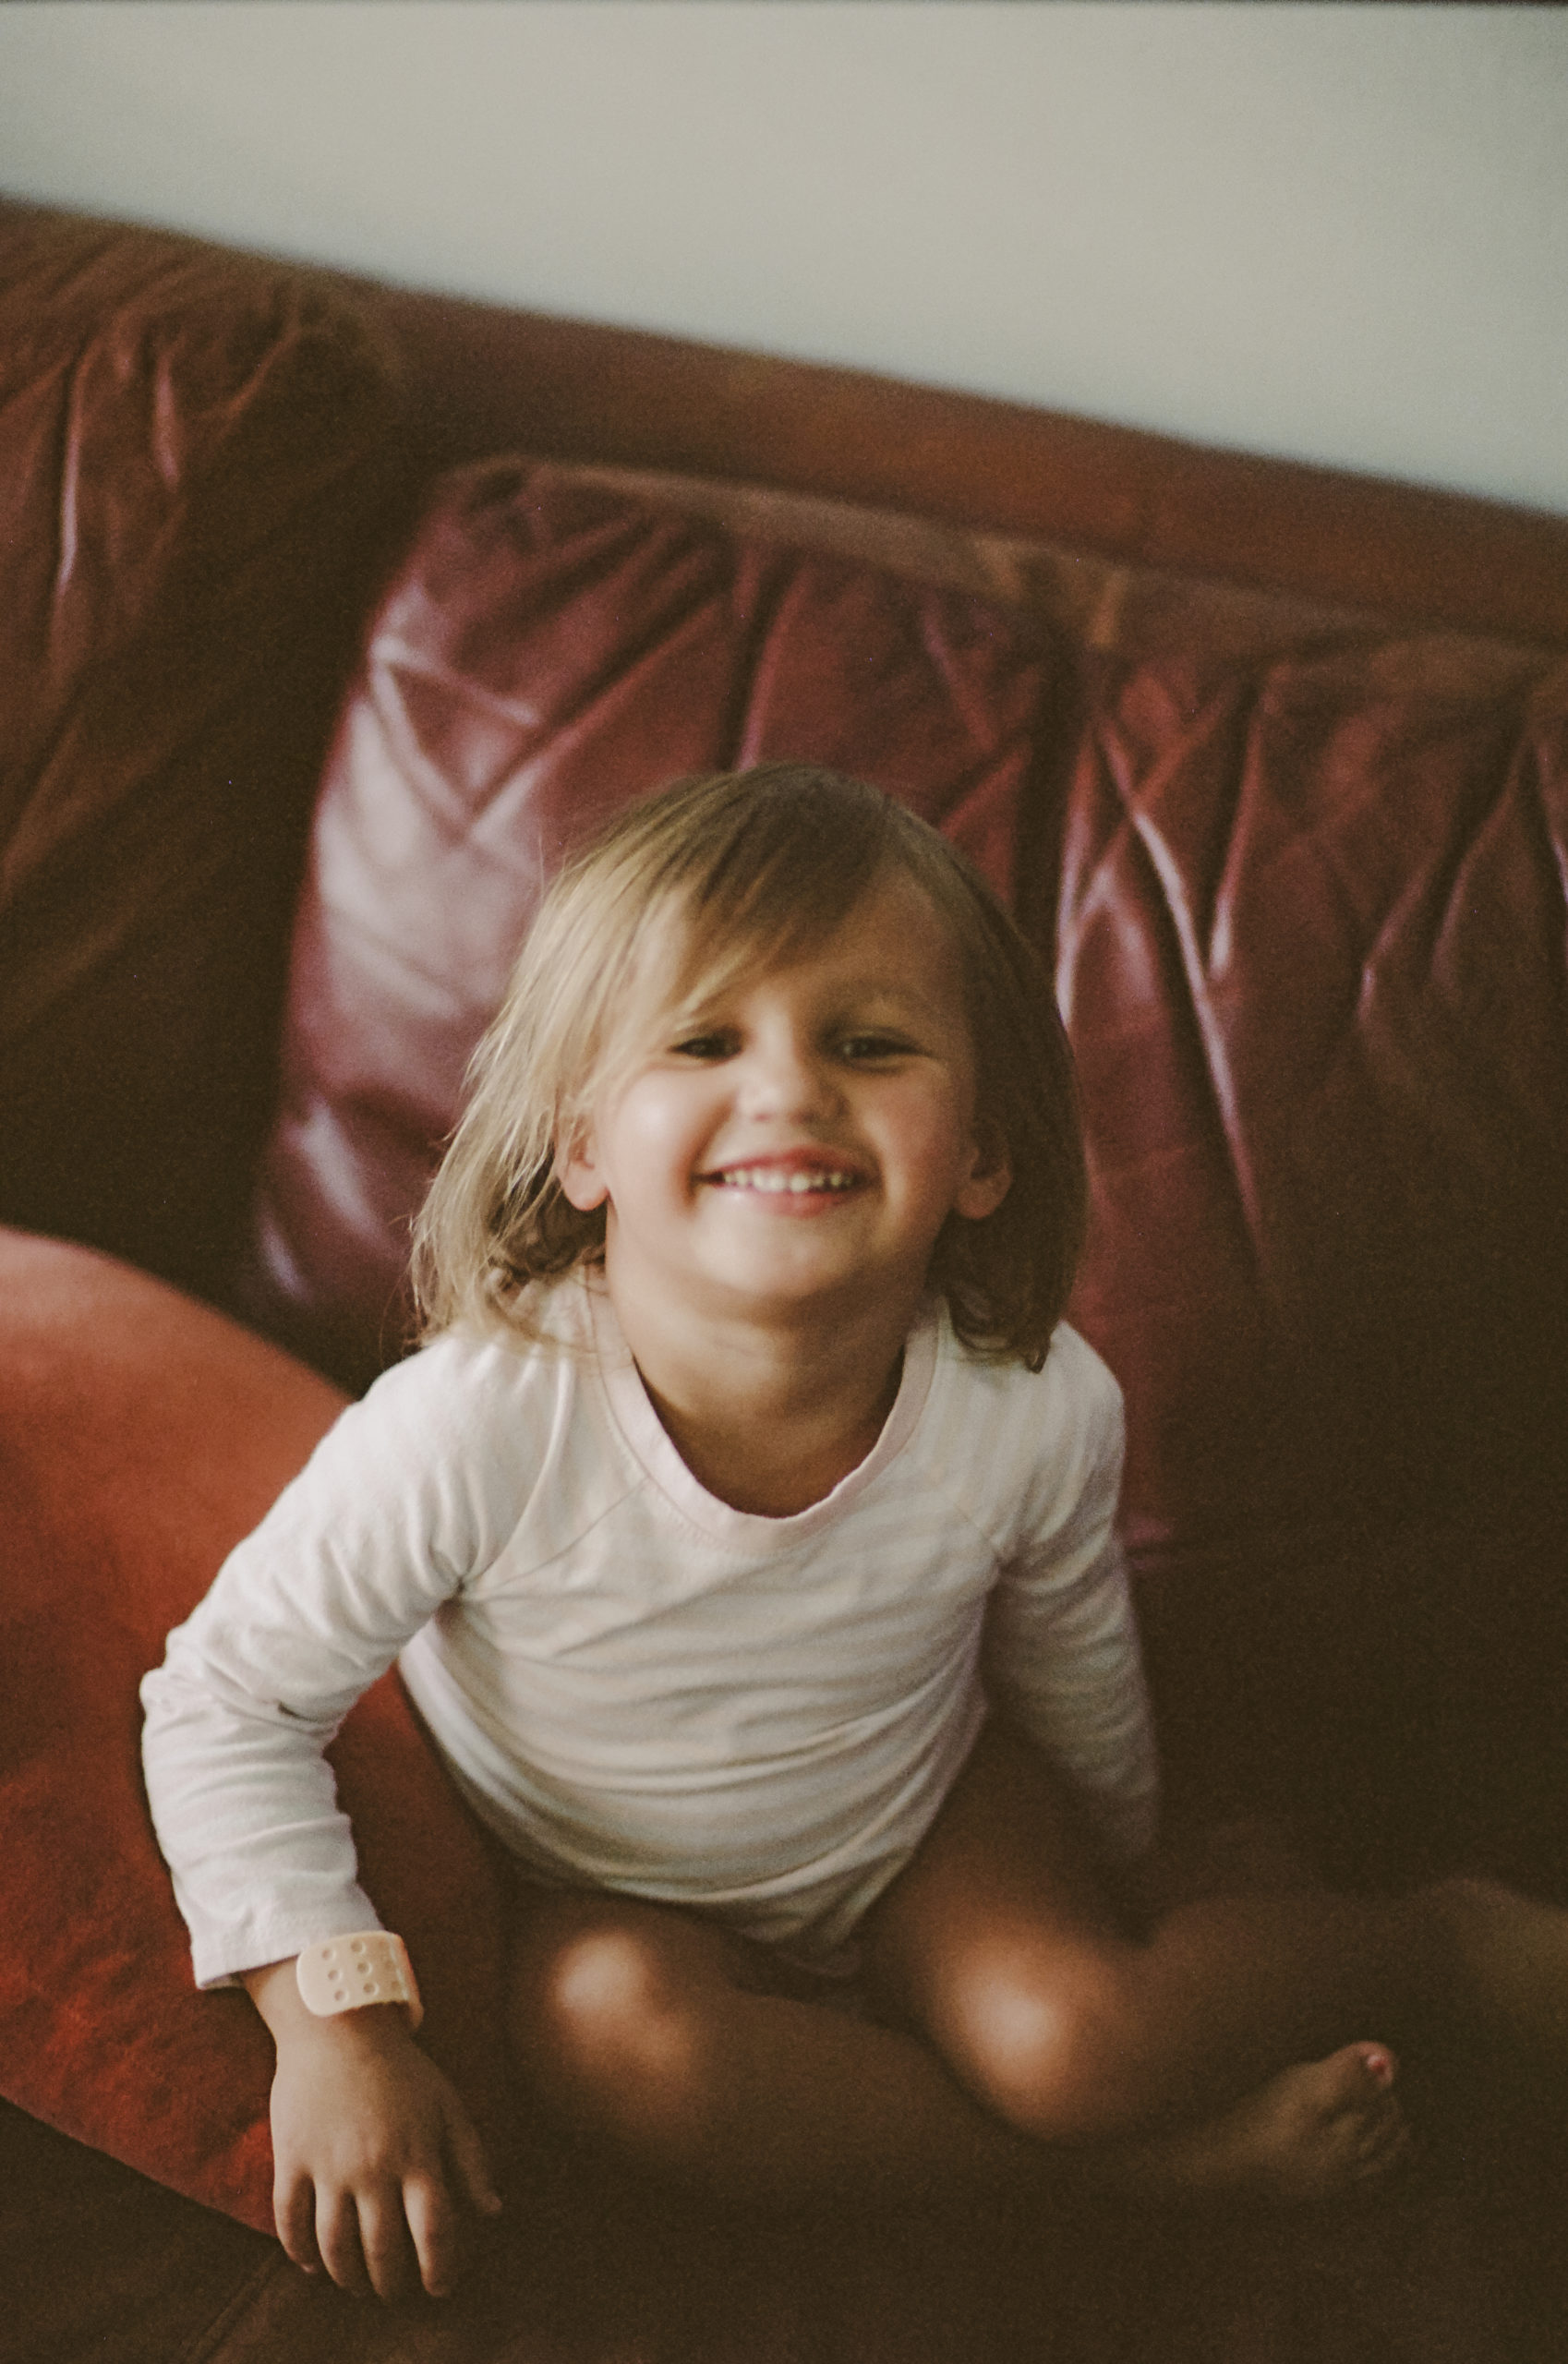 is film dead? nope, not according to this shot of a little girl sitting on a leather couch in the living room